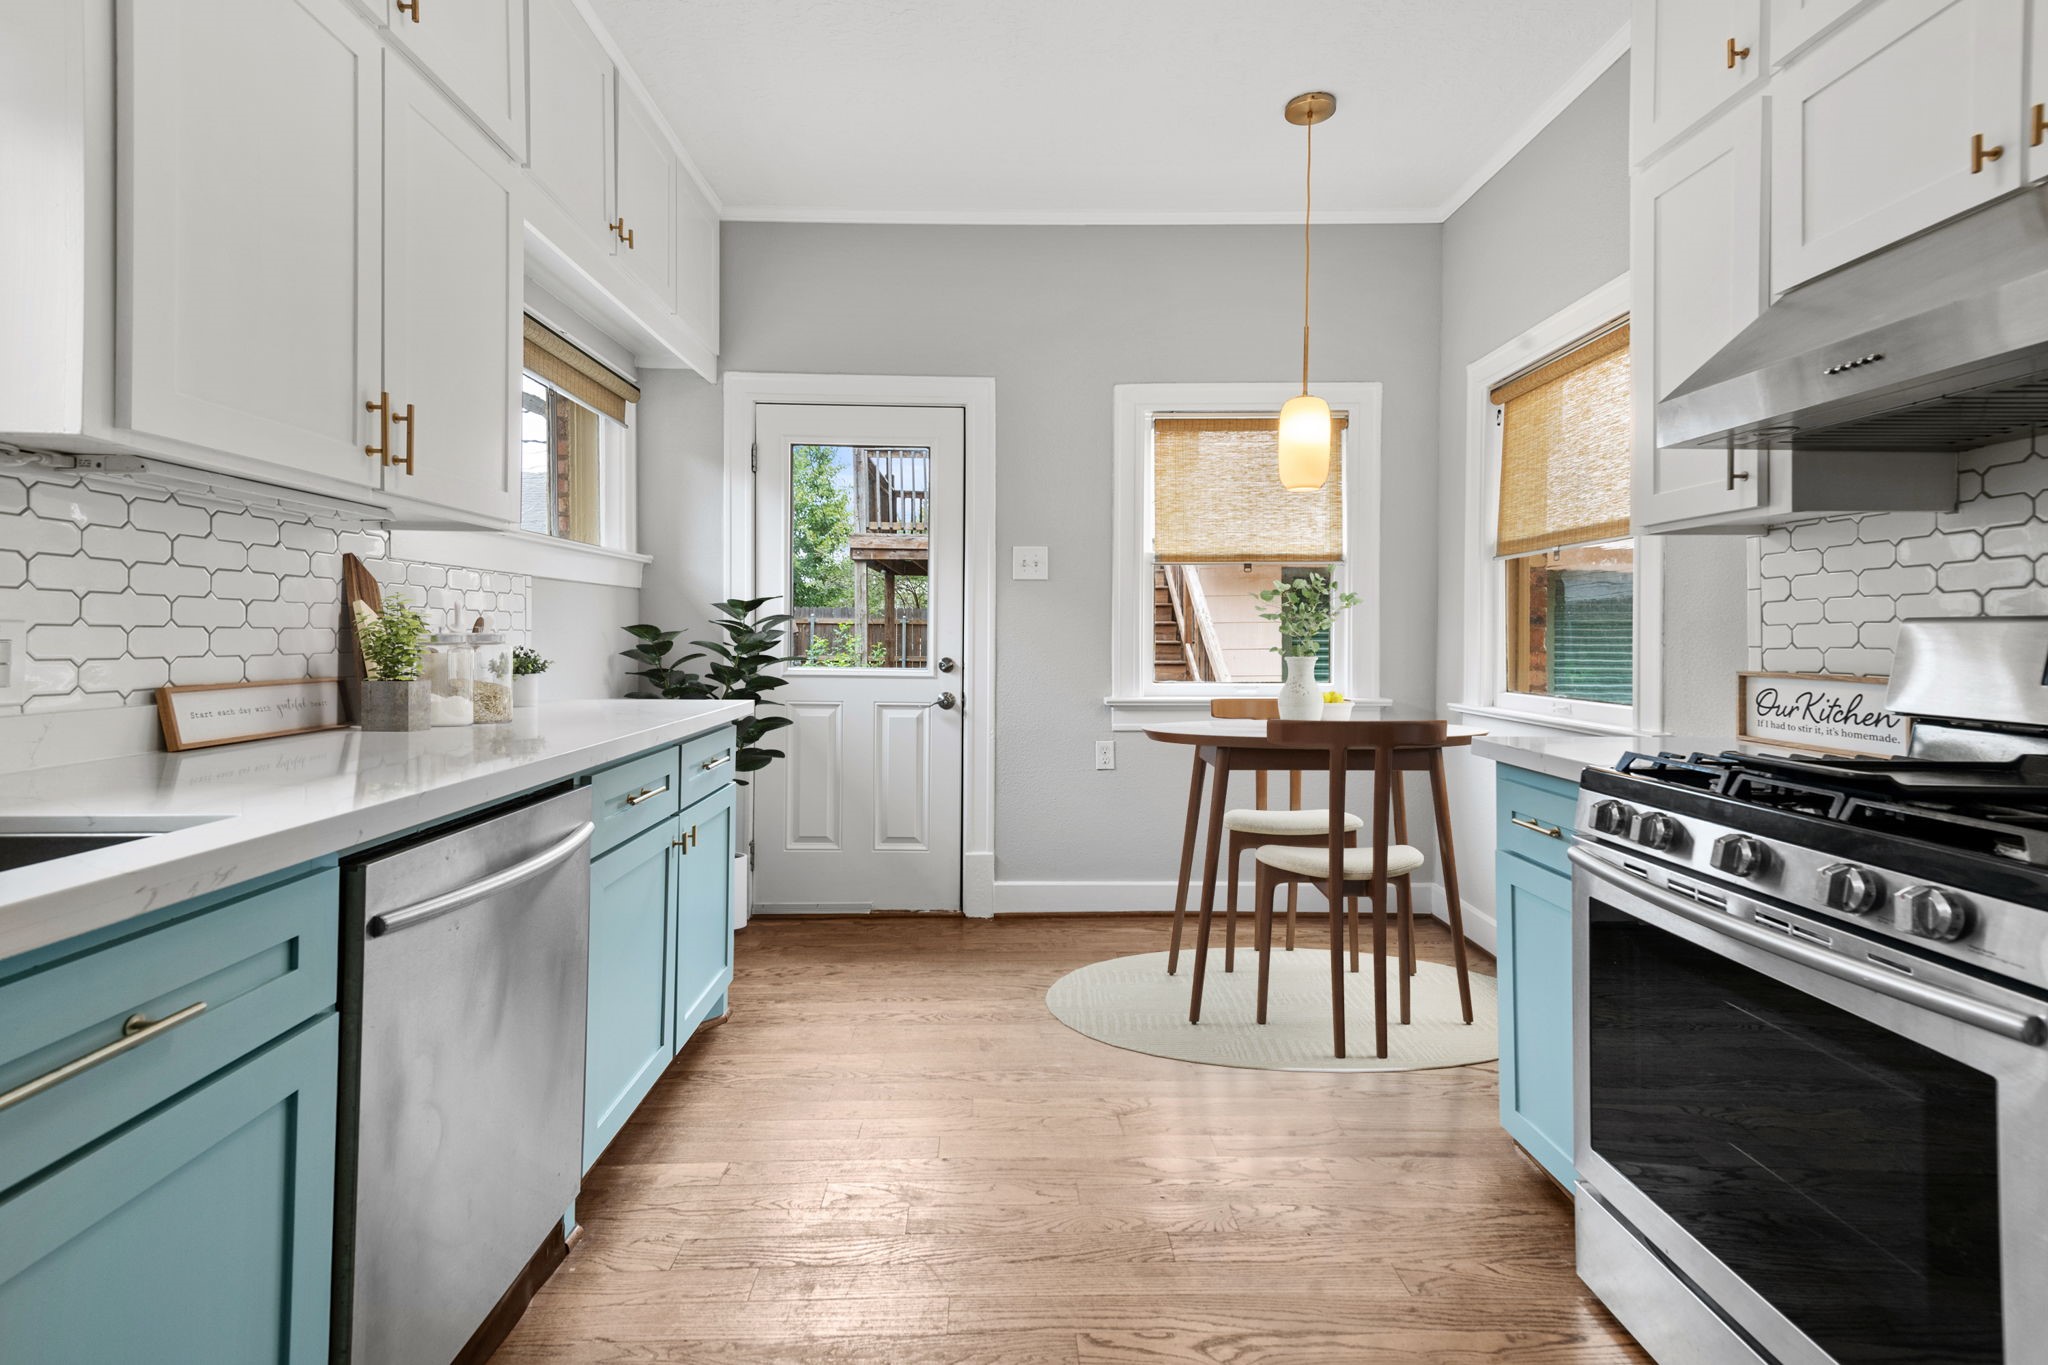 Just beyond the dining room is this updated and adorable kitchen!